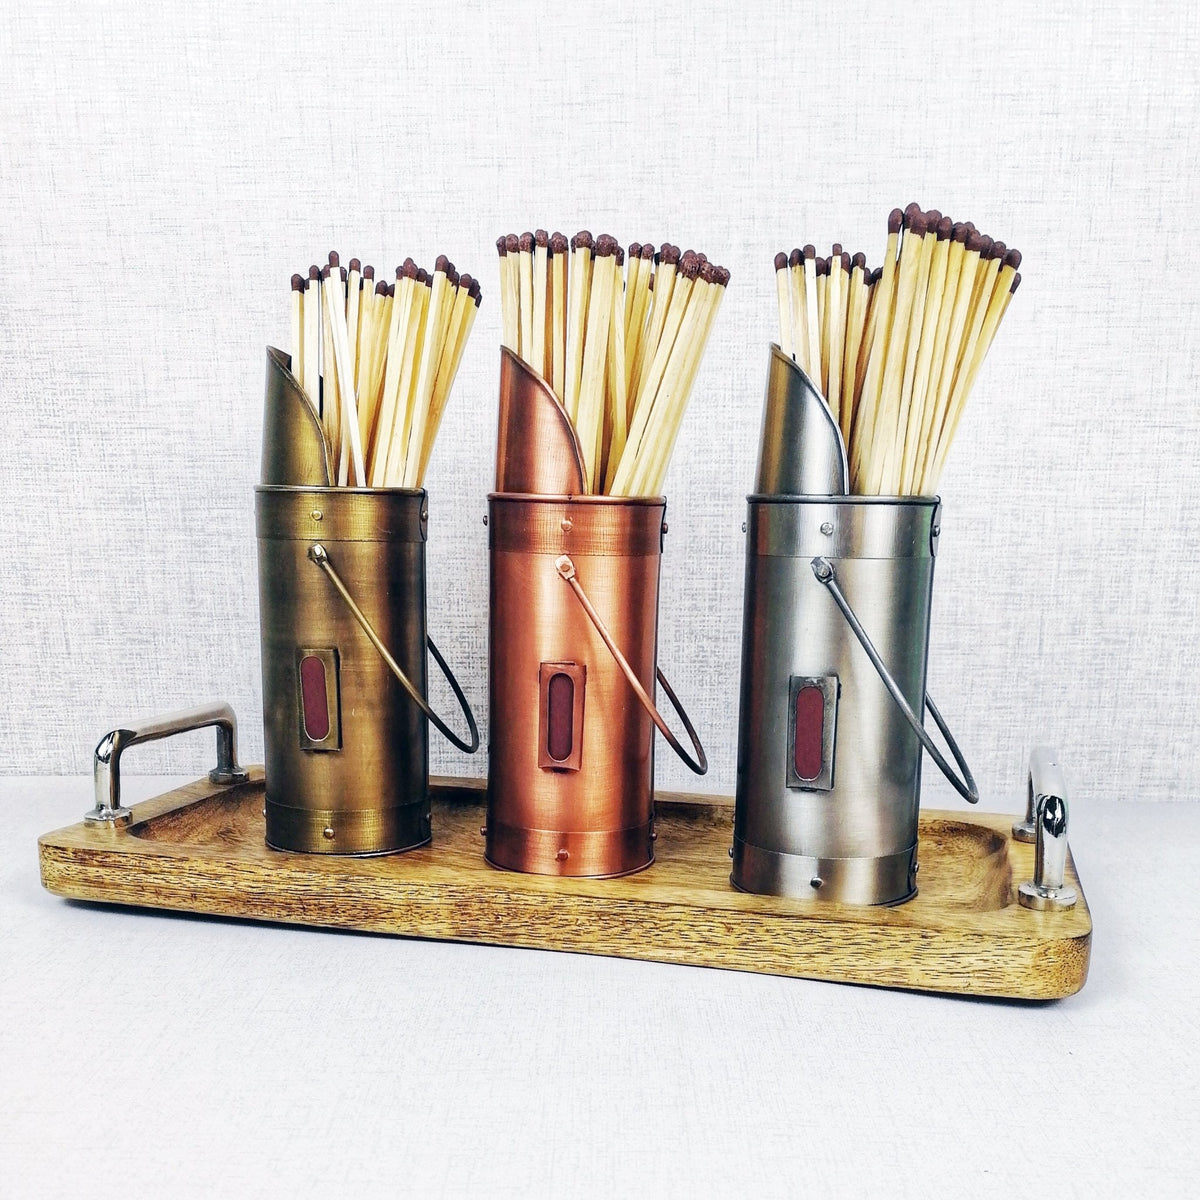 Matchstick holders bronze pewter copper on wooden tray against grey background